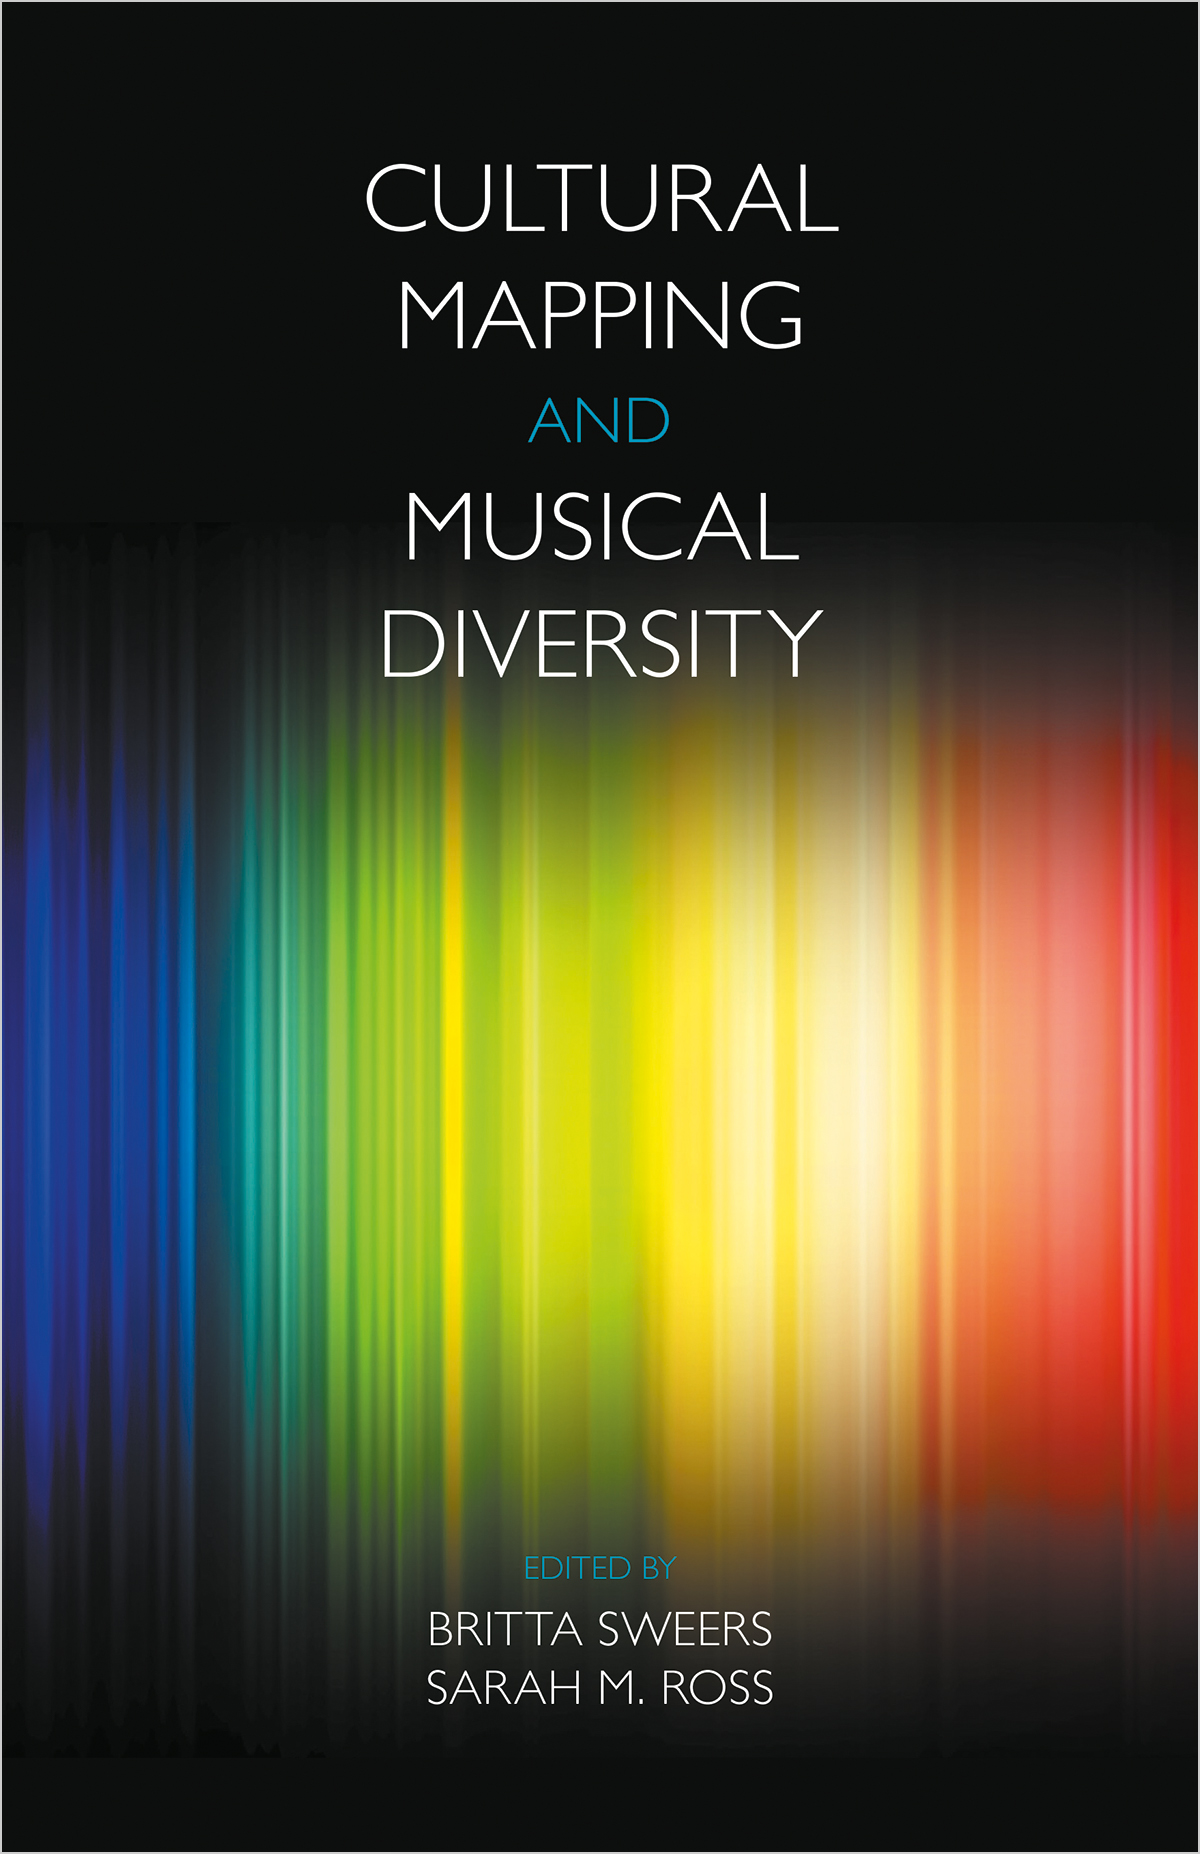 Britta Sweers, Sarah M. Ross | Cultural Mapping and Musical Diversity